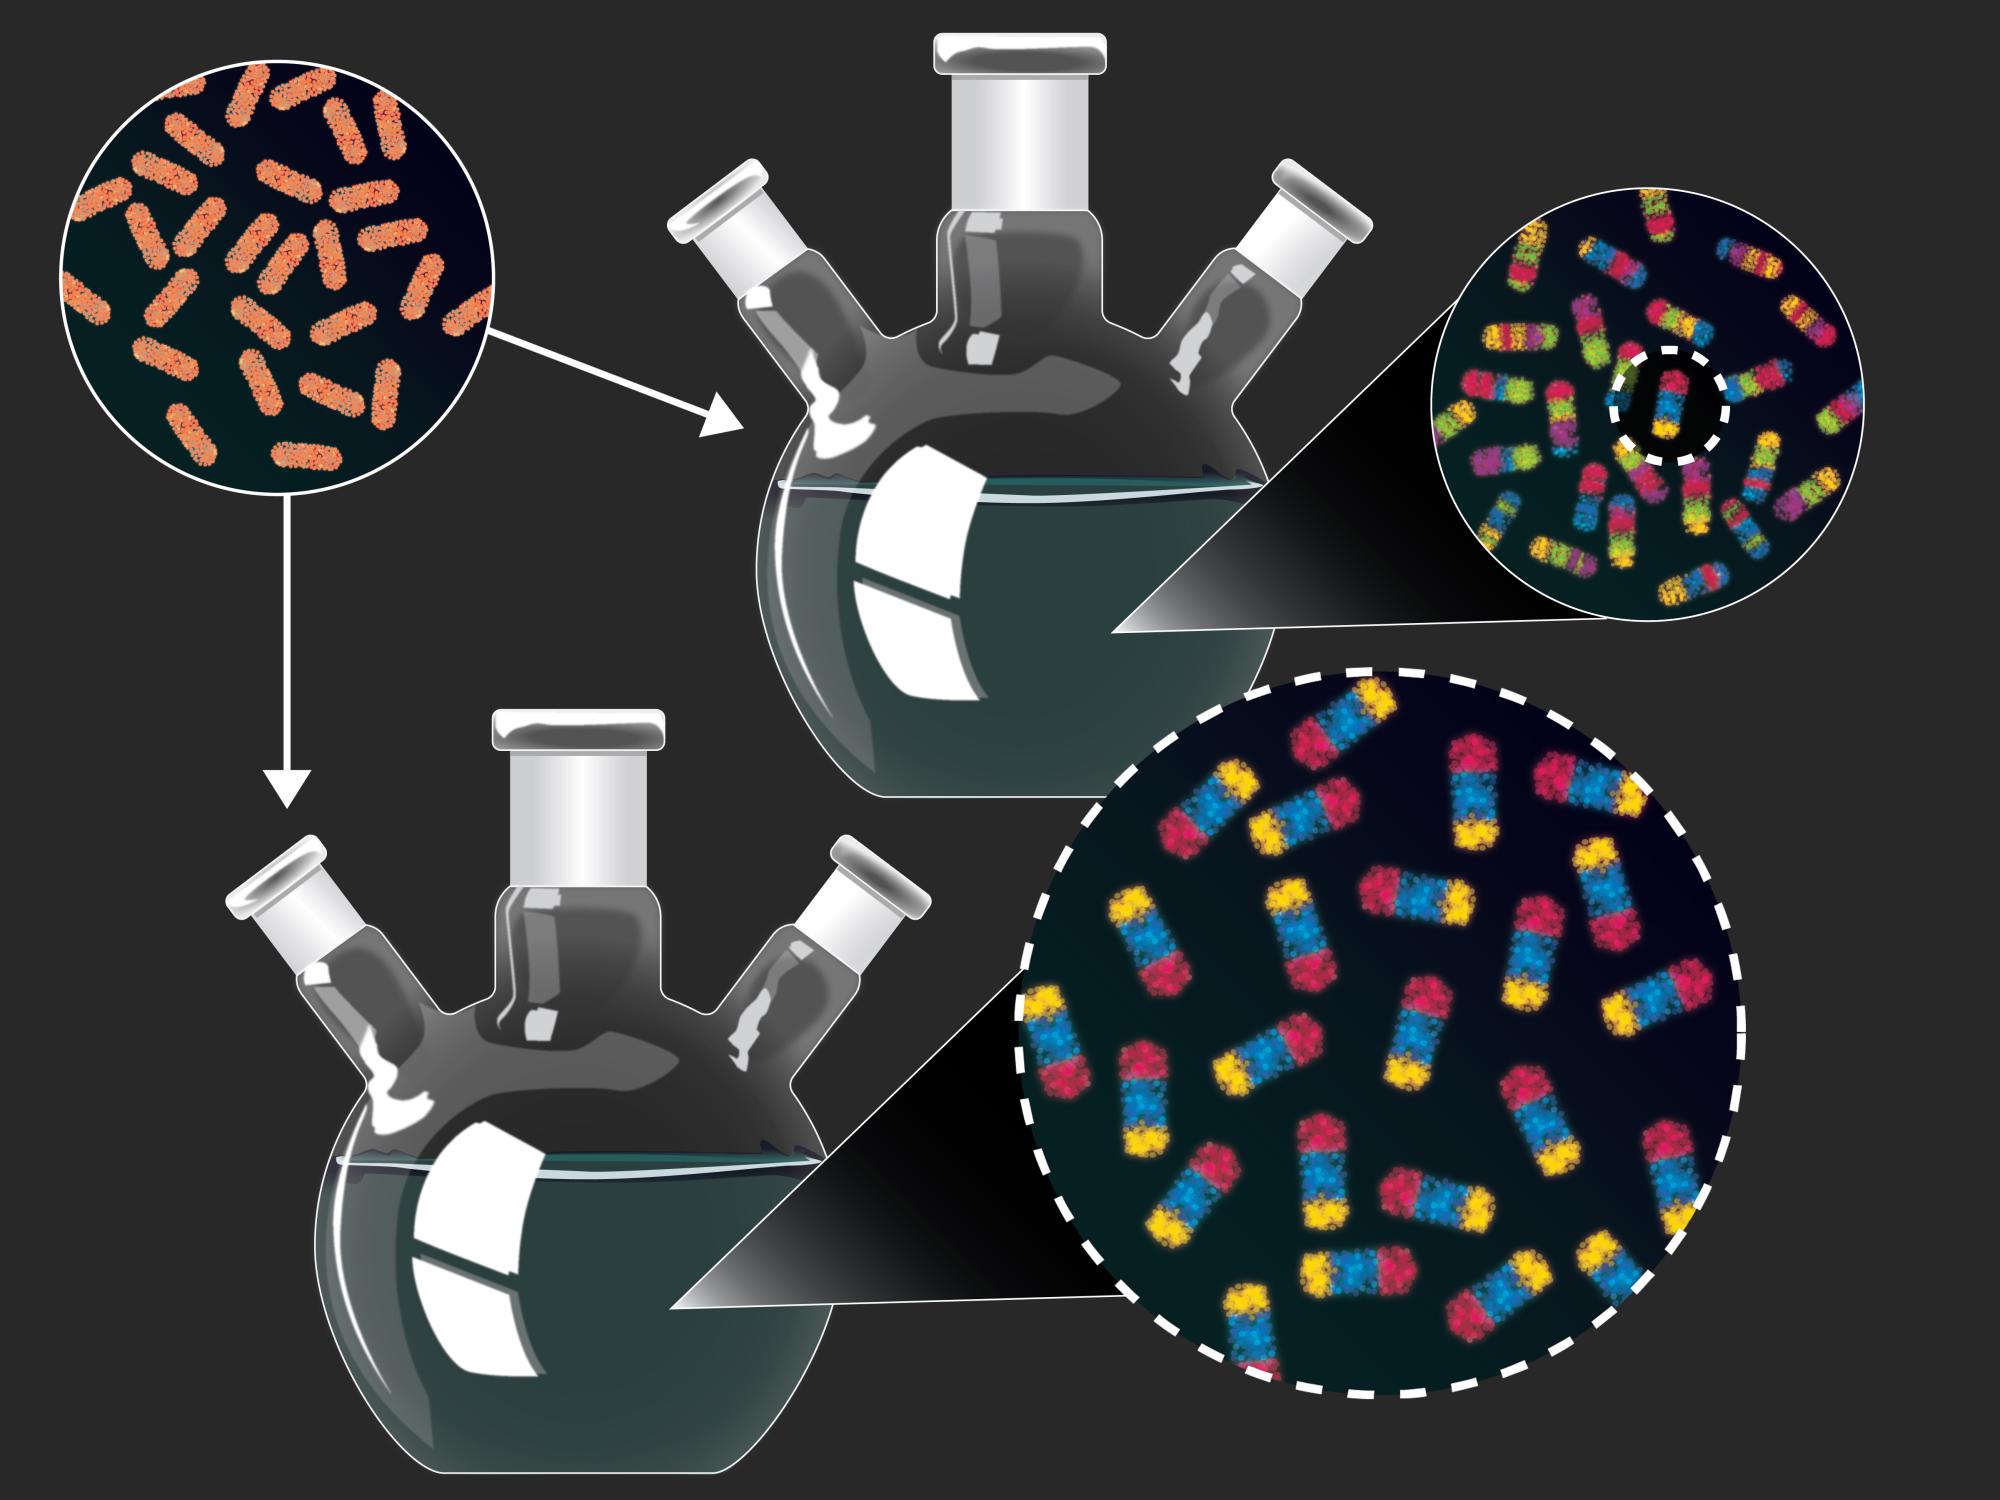 producing nanoparticles